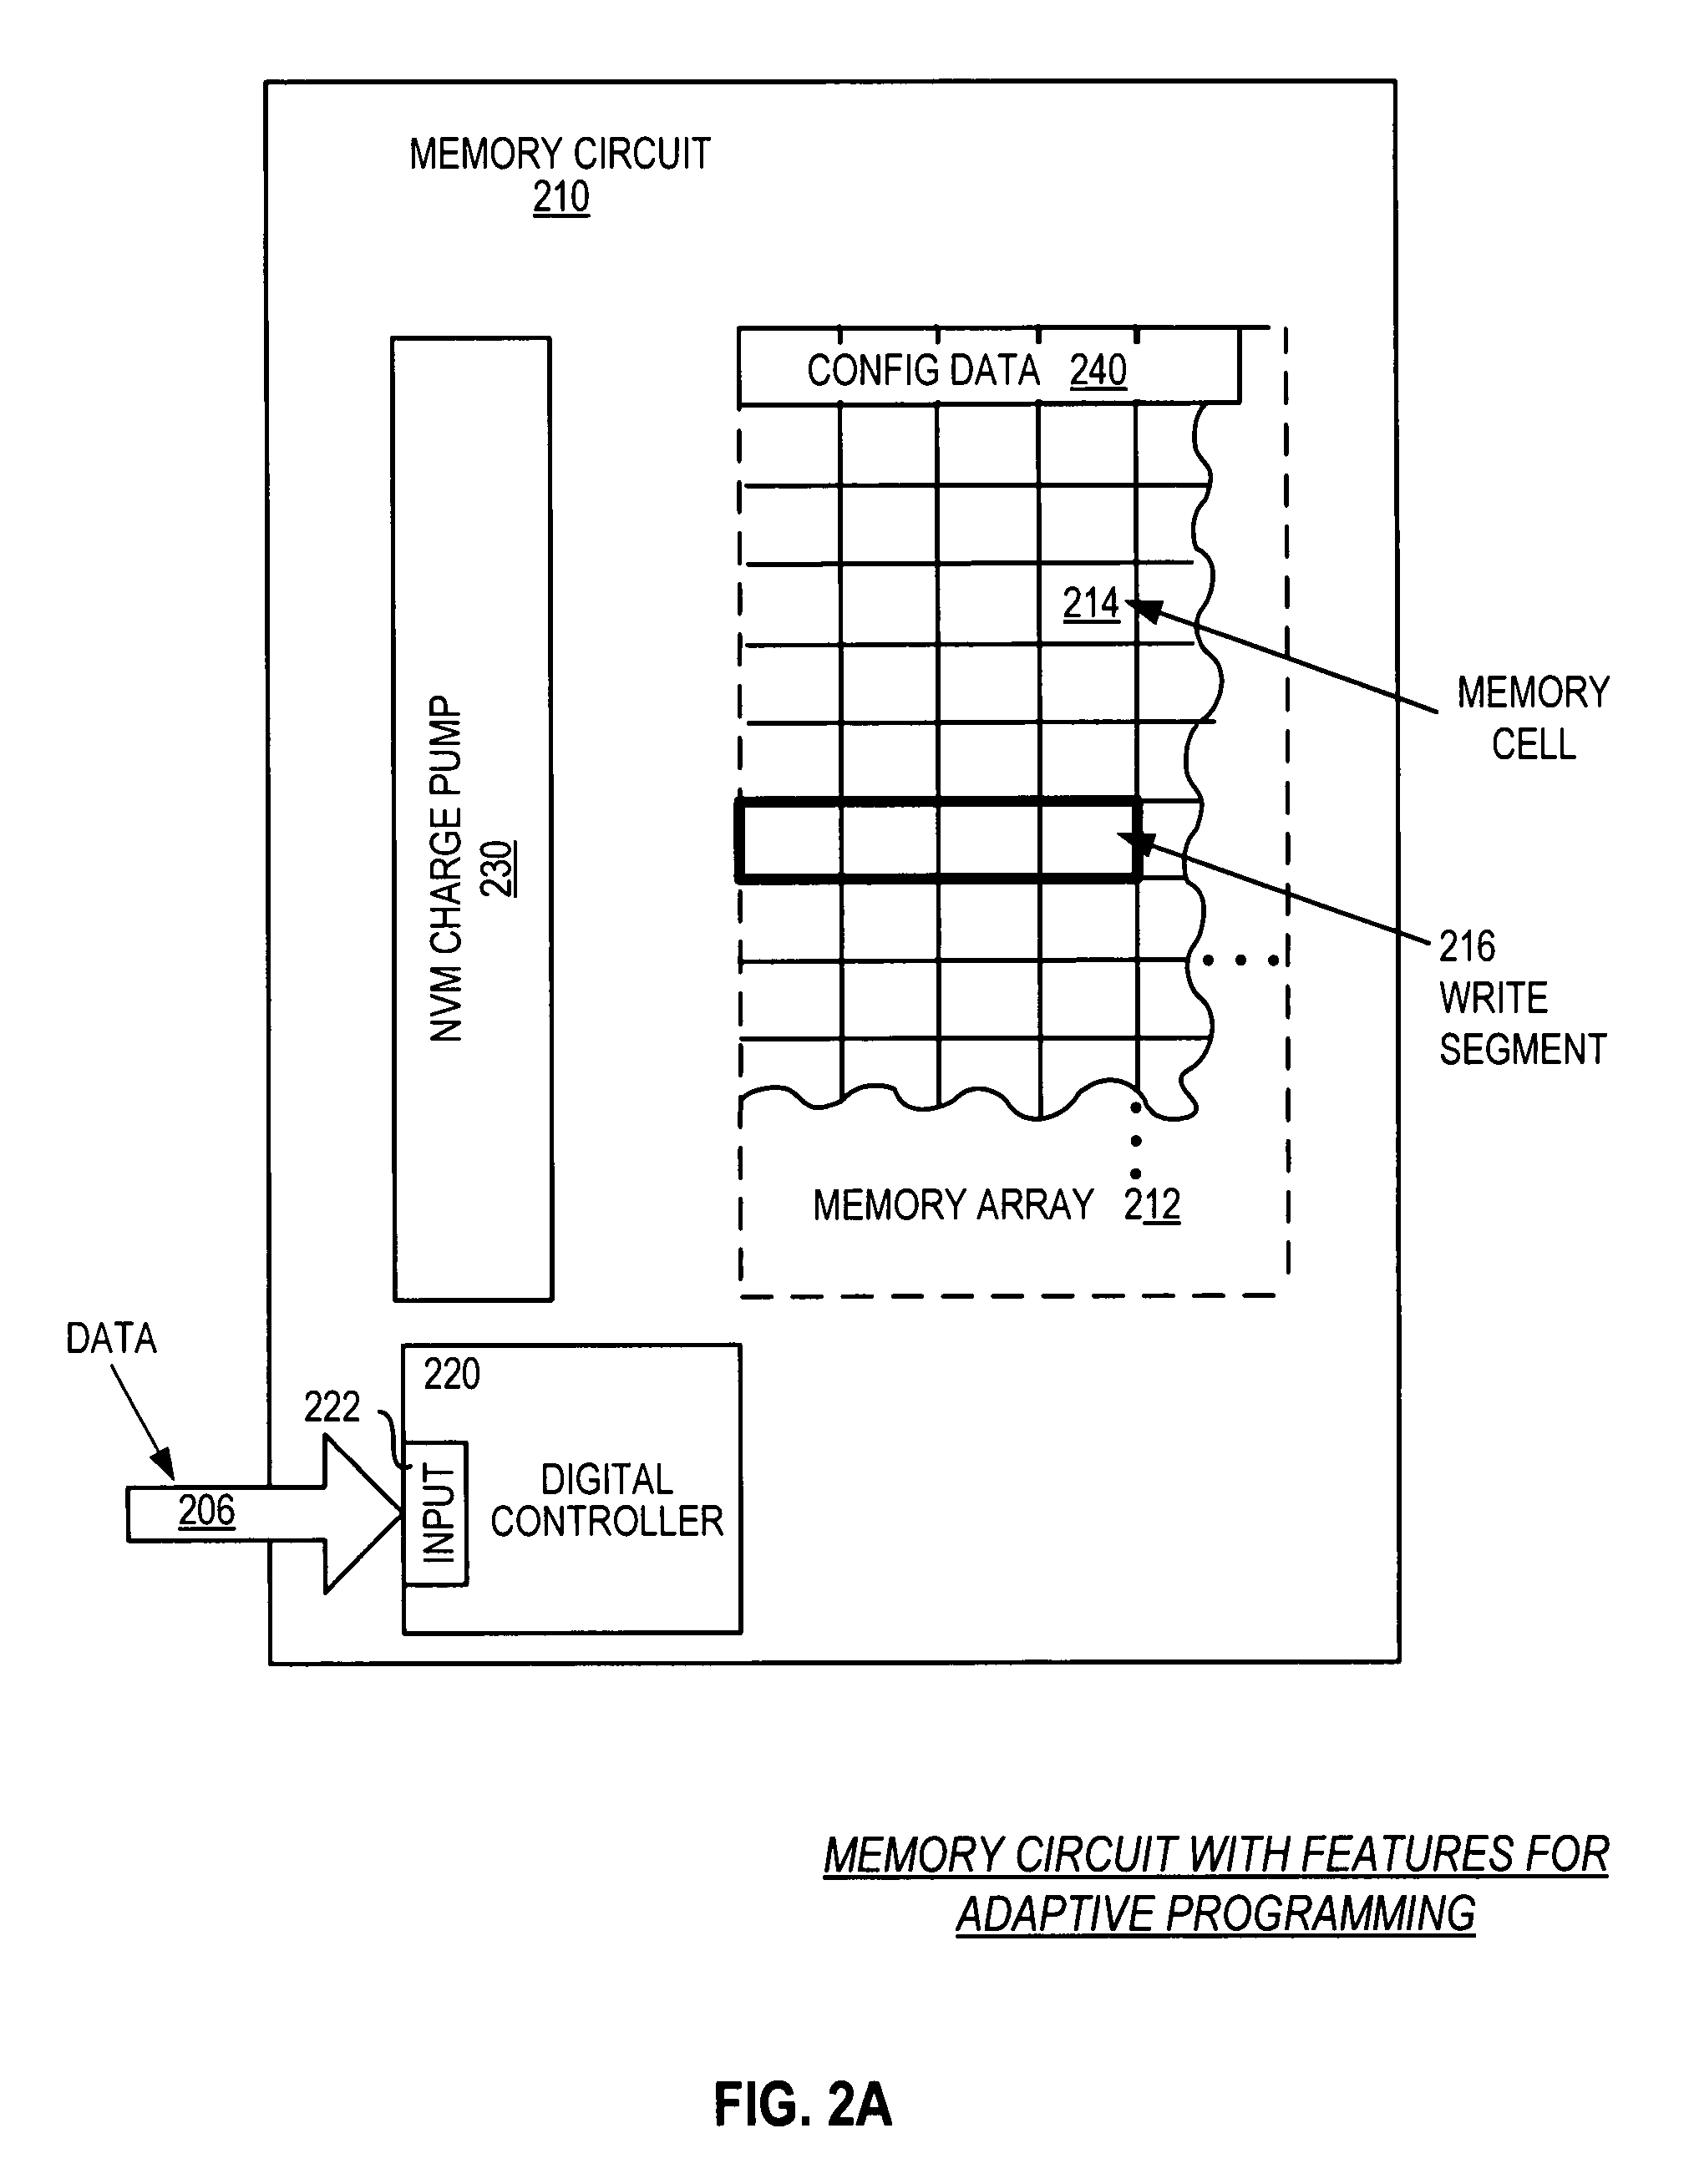 Adaptive programming of memory circuit including writing data in cells of a memory circuit